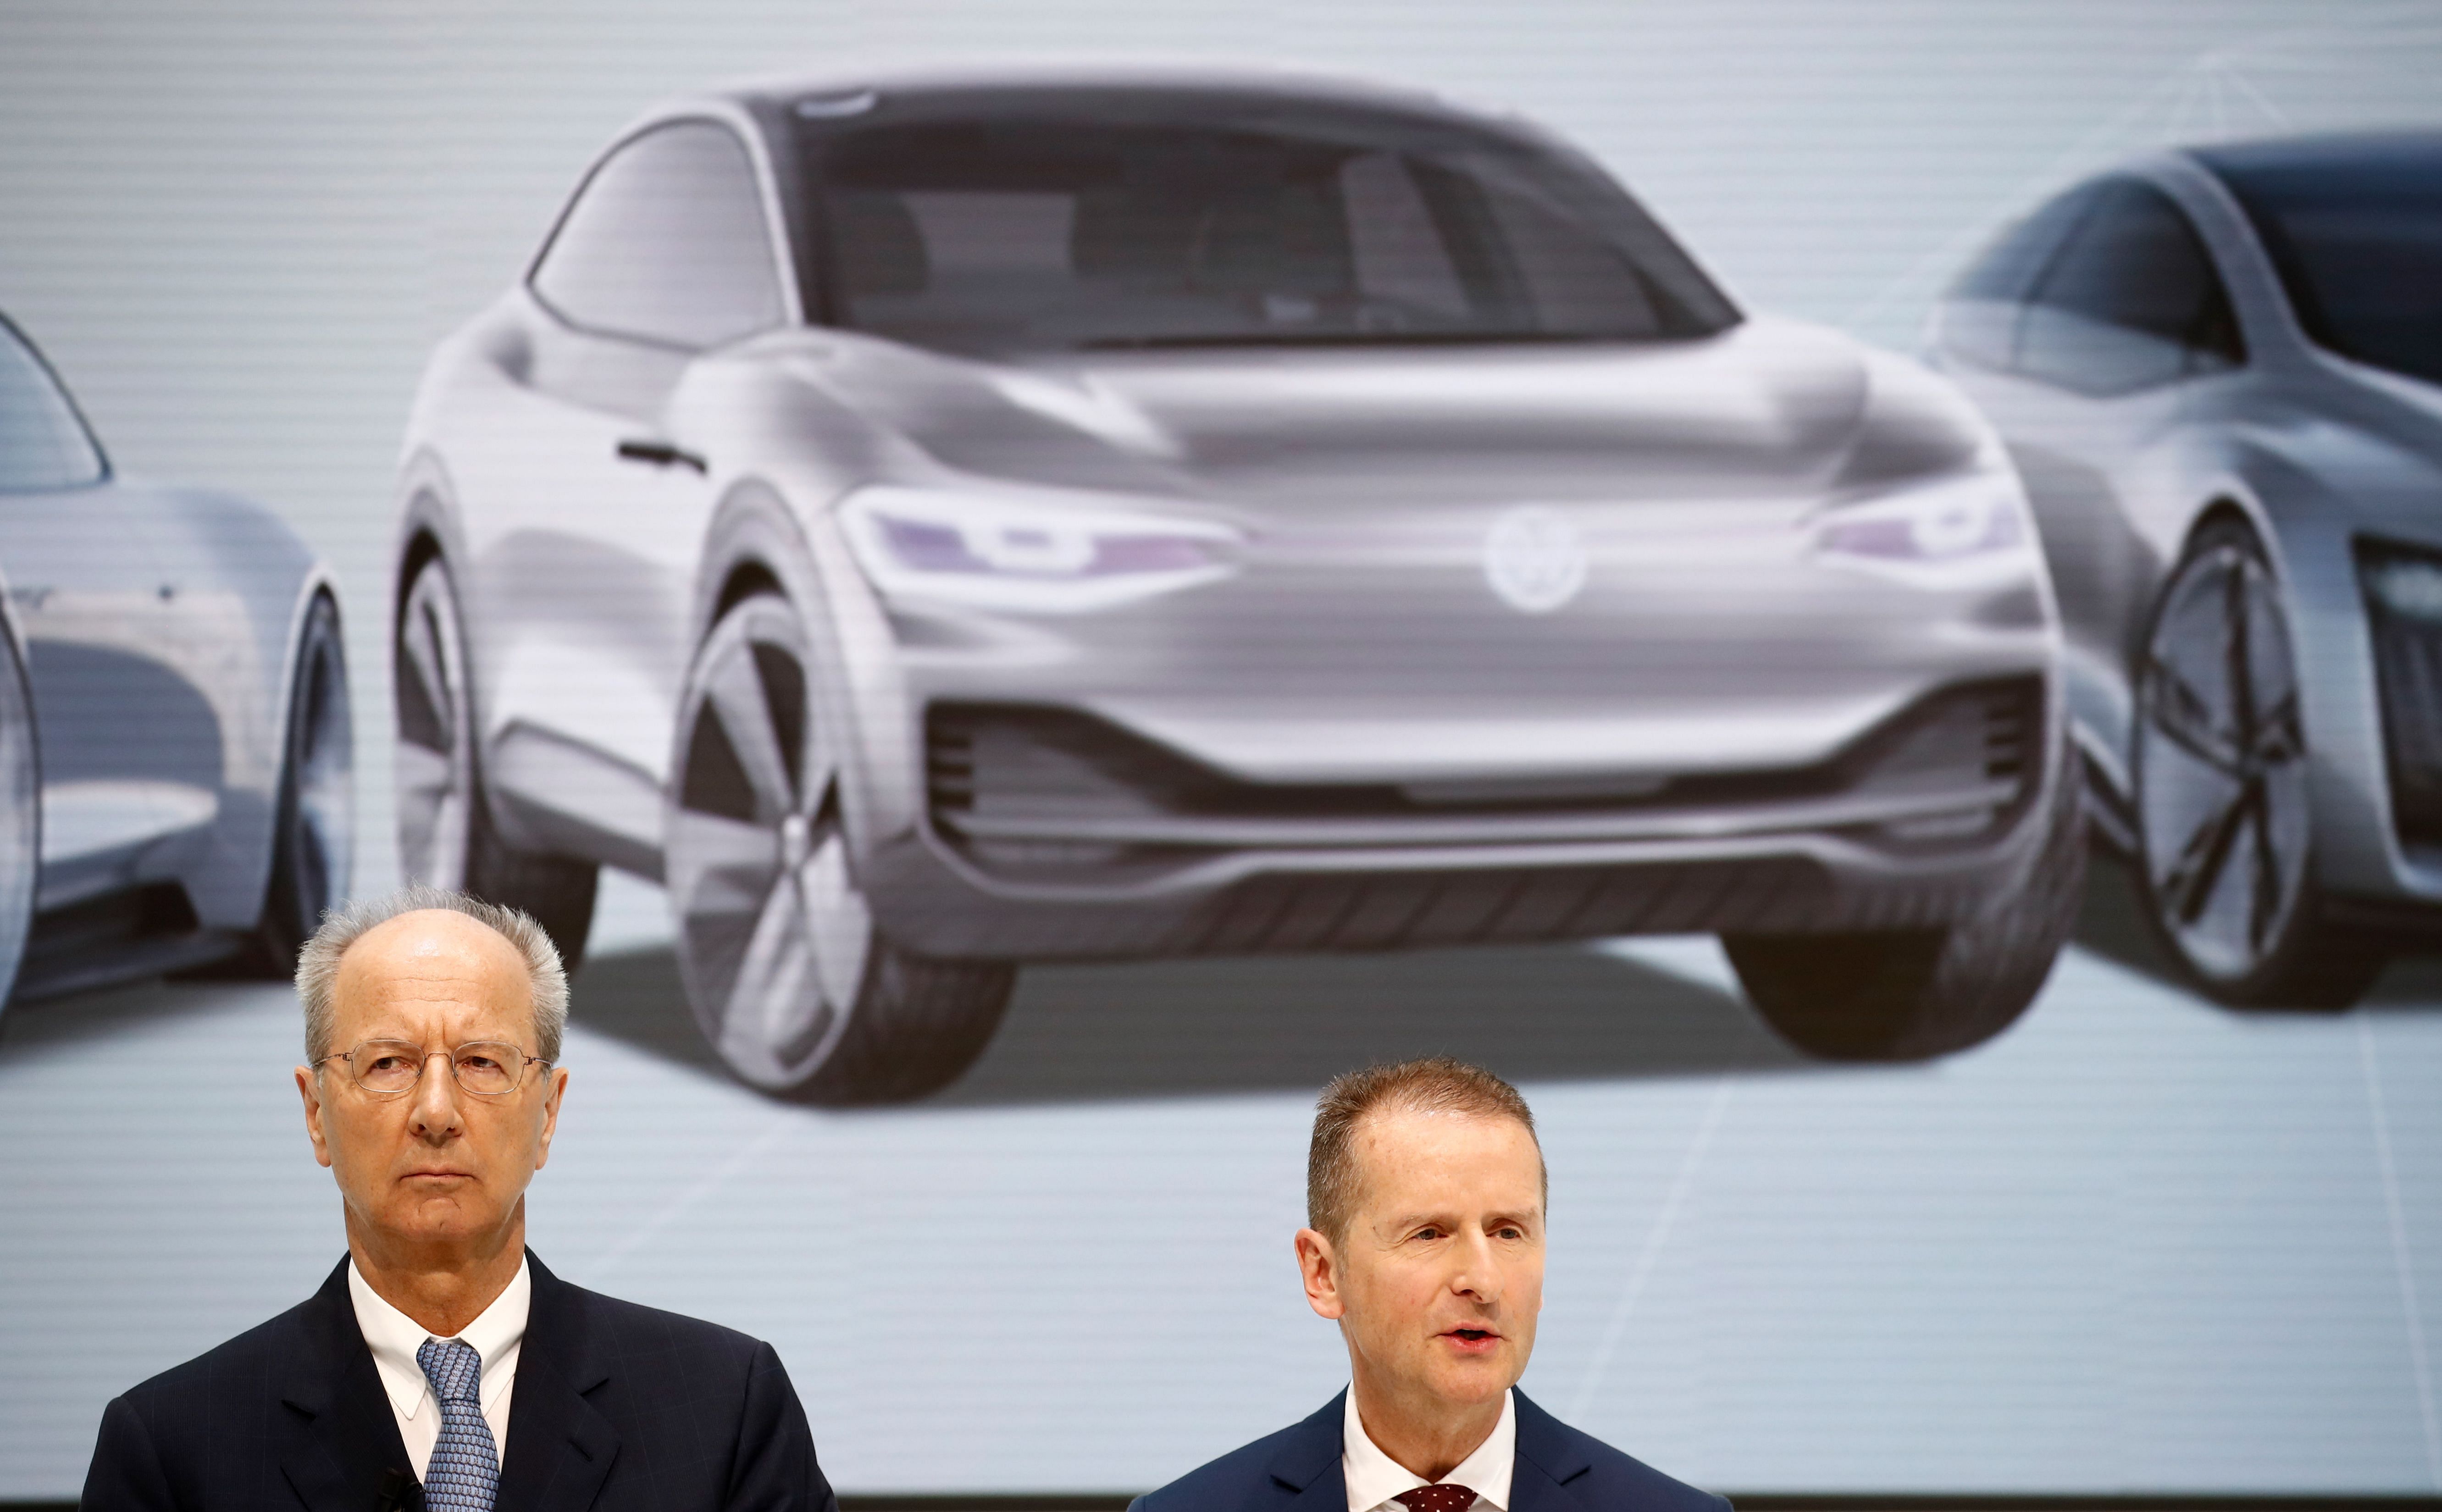 CEO of German car maker Volkswagen (VW) Herbert Diess (R) and VW supervisory board chairman Hans Dieter Poetsch giving a press conference at the company's headquarters in Wolfsburg, central Germany (AFP photo)